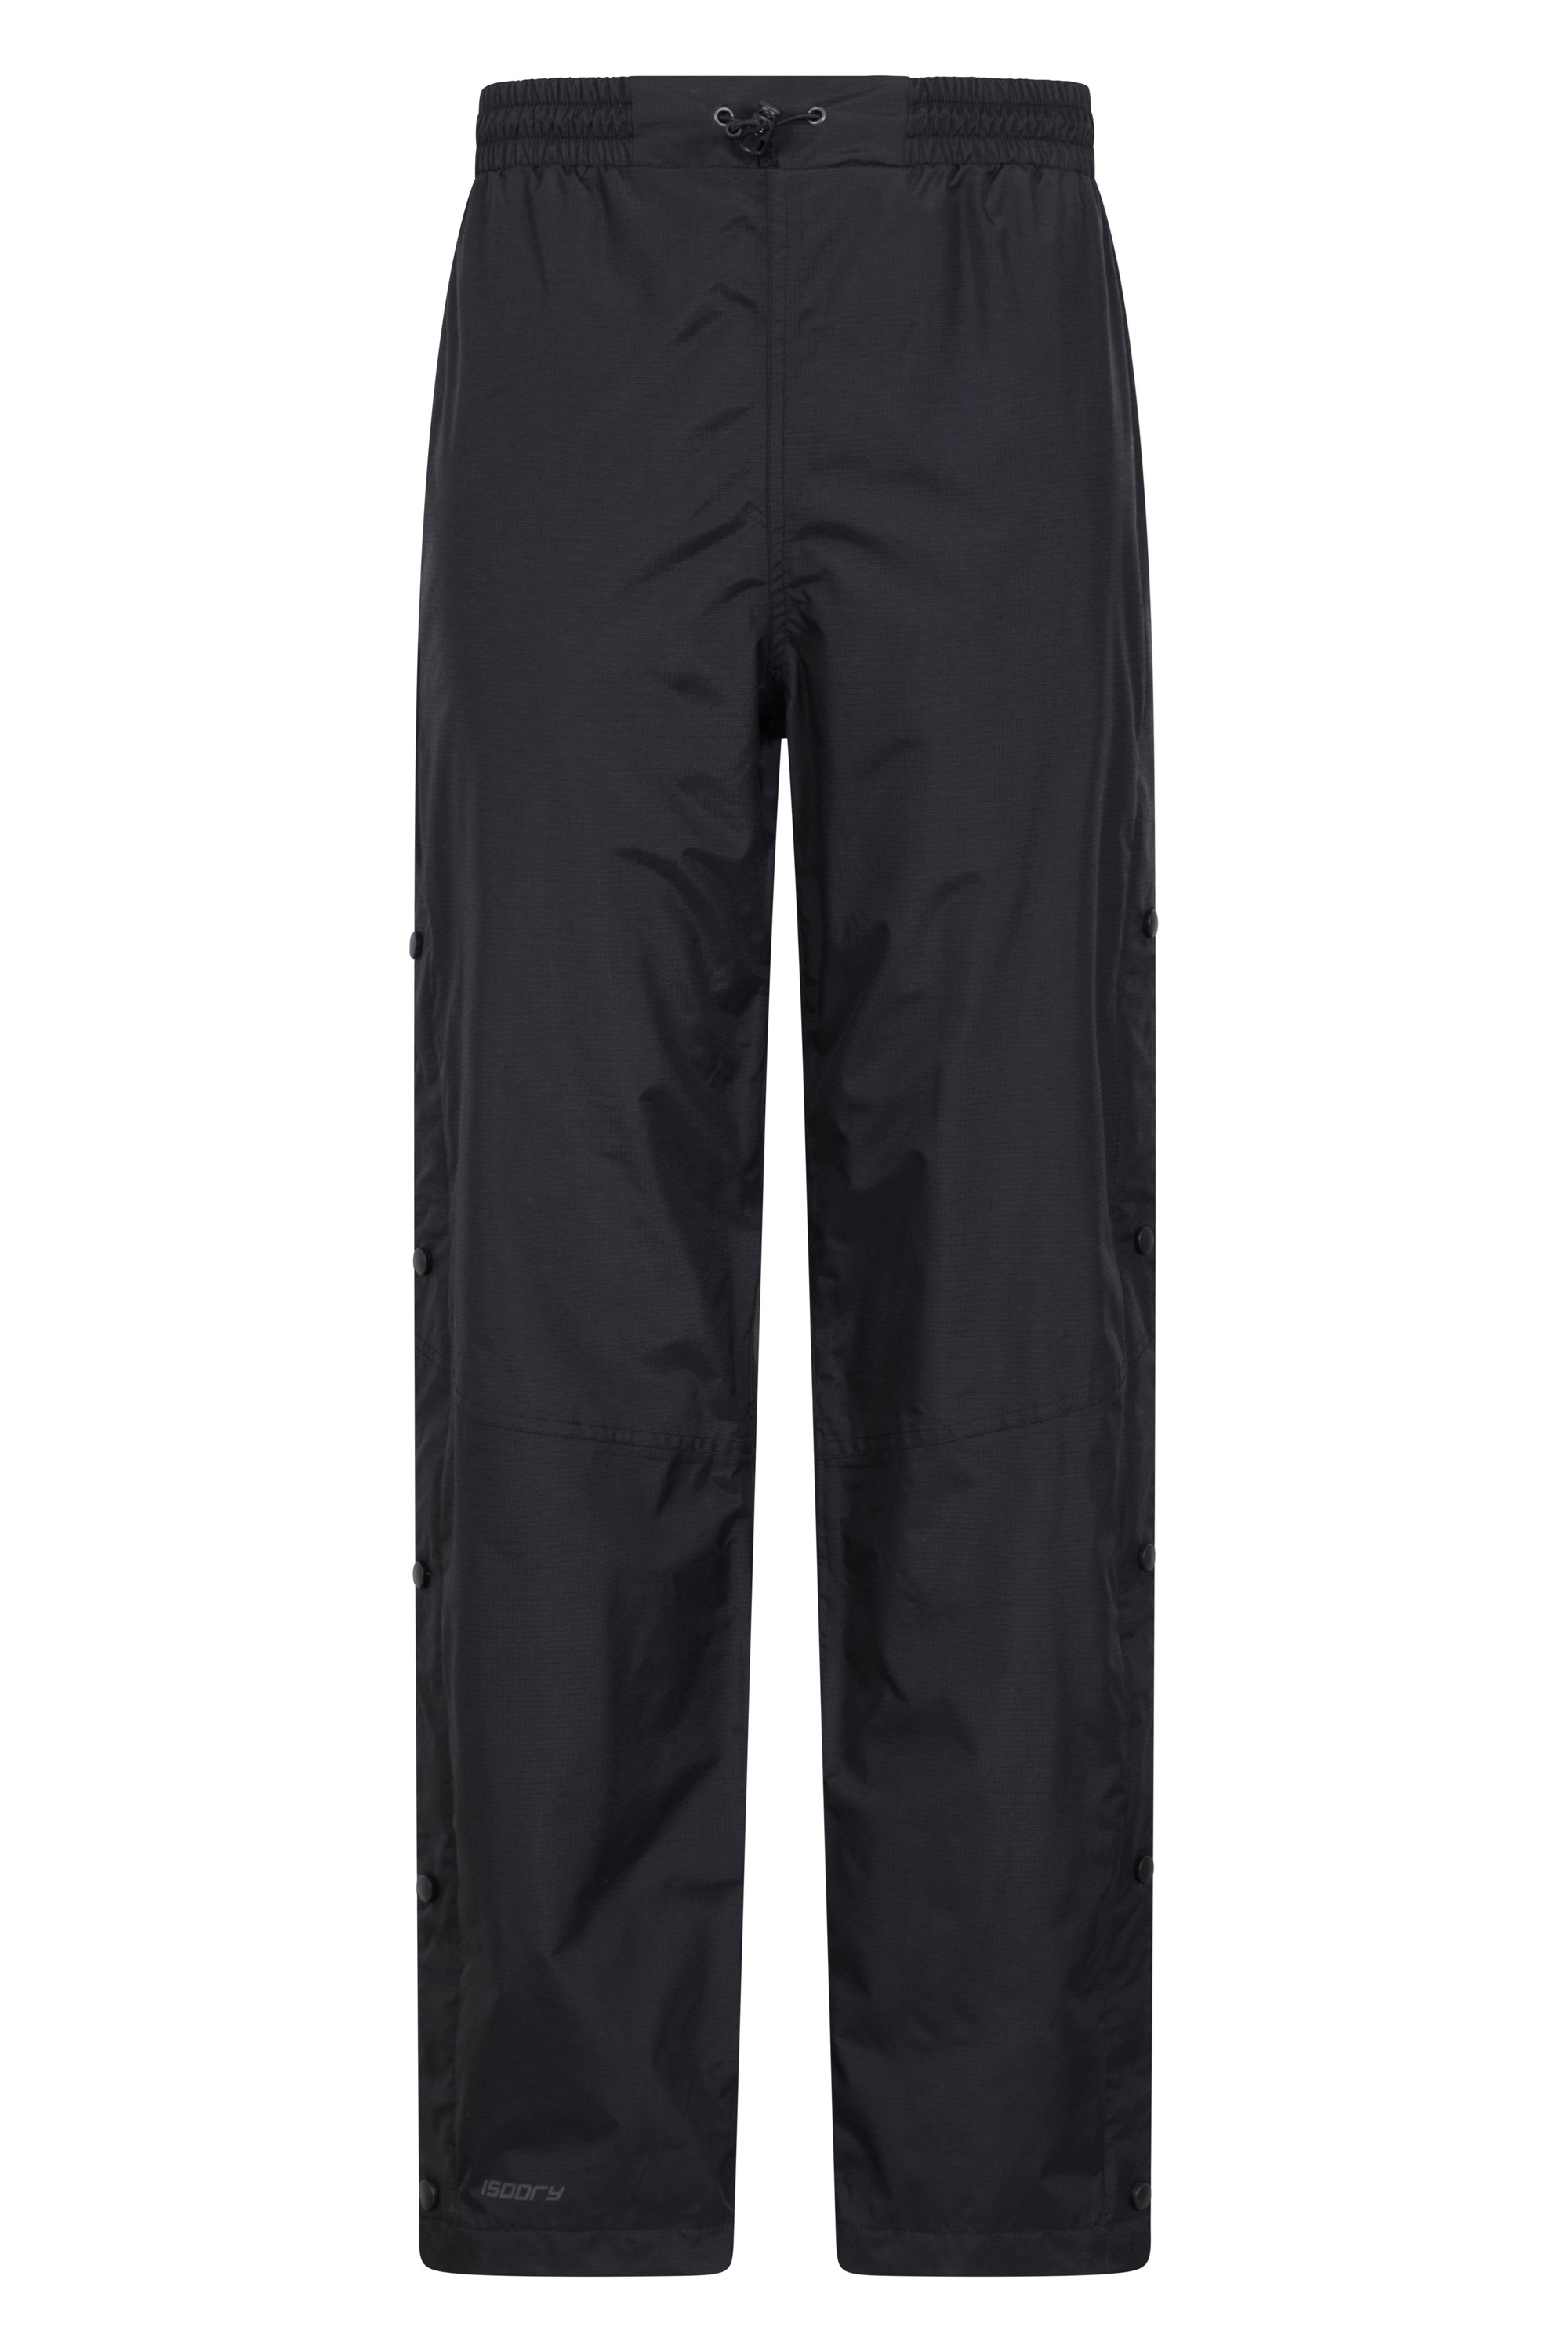 Men's GORE-TEX® Mountain Pants TNF BLACK | The North Face New Zealand